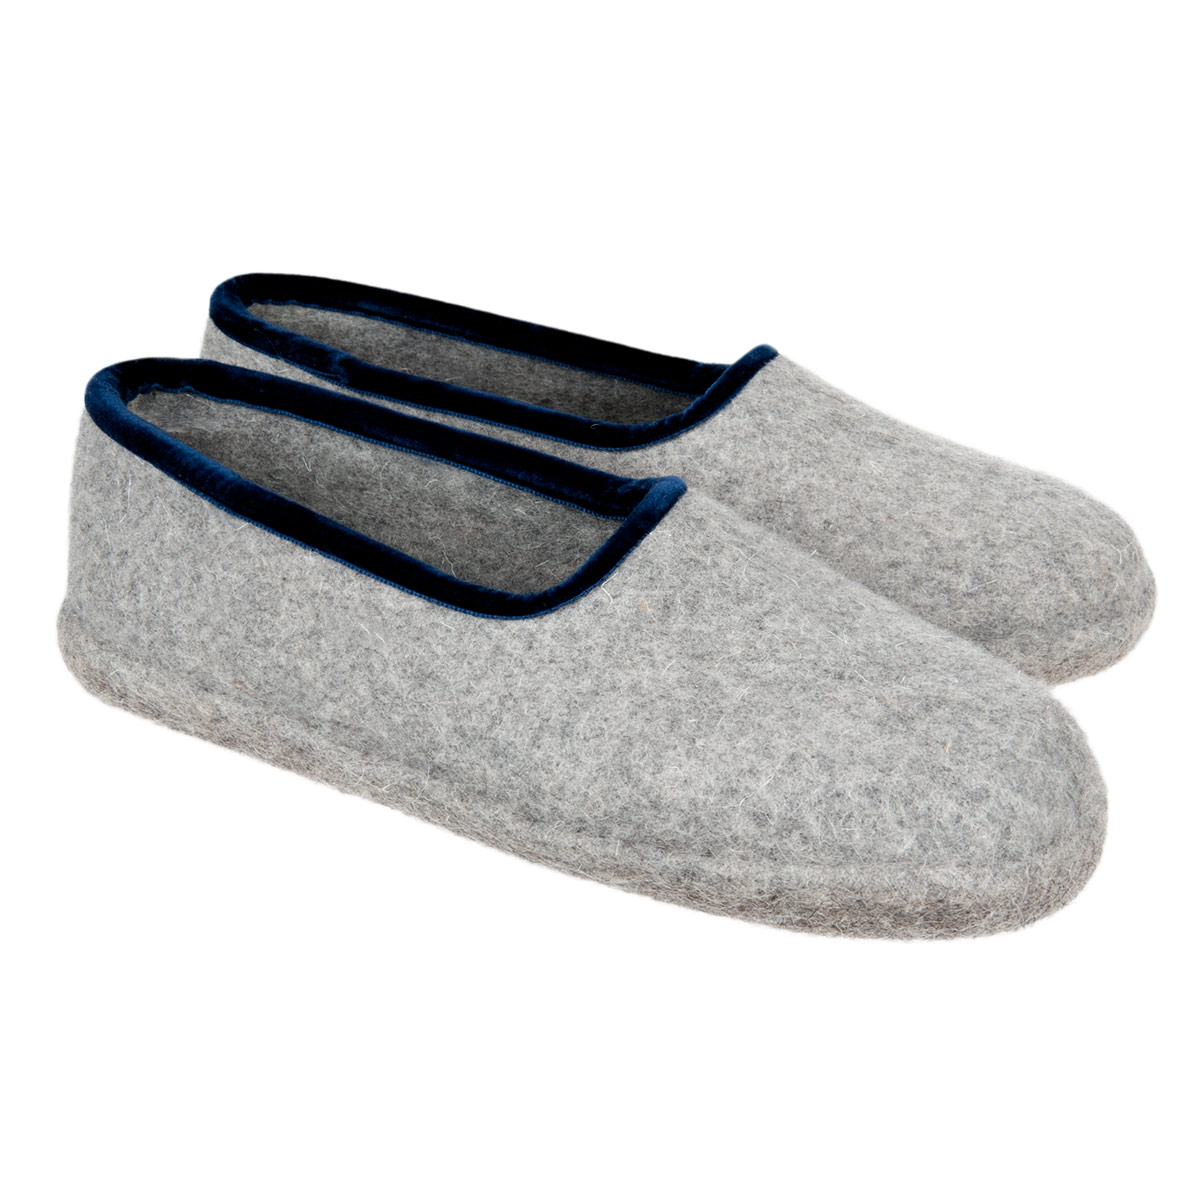 mens leather moccasin slippers hard sole